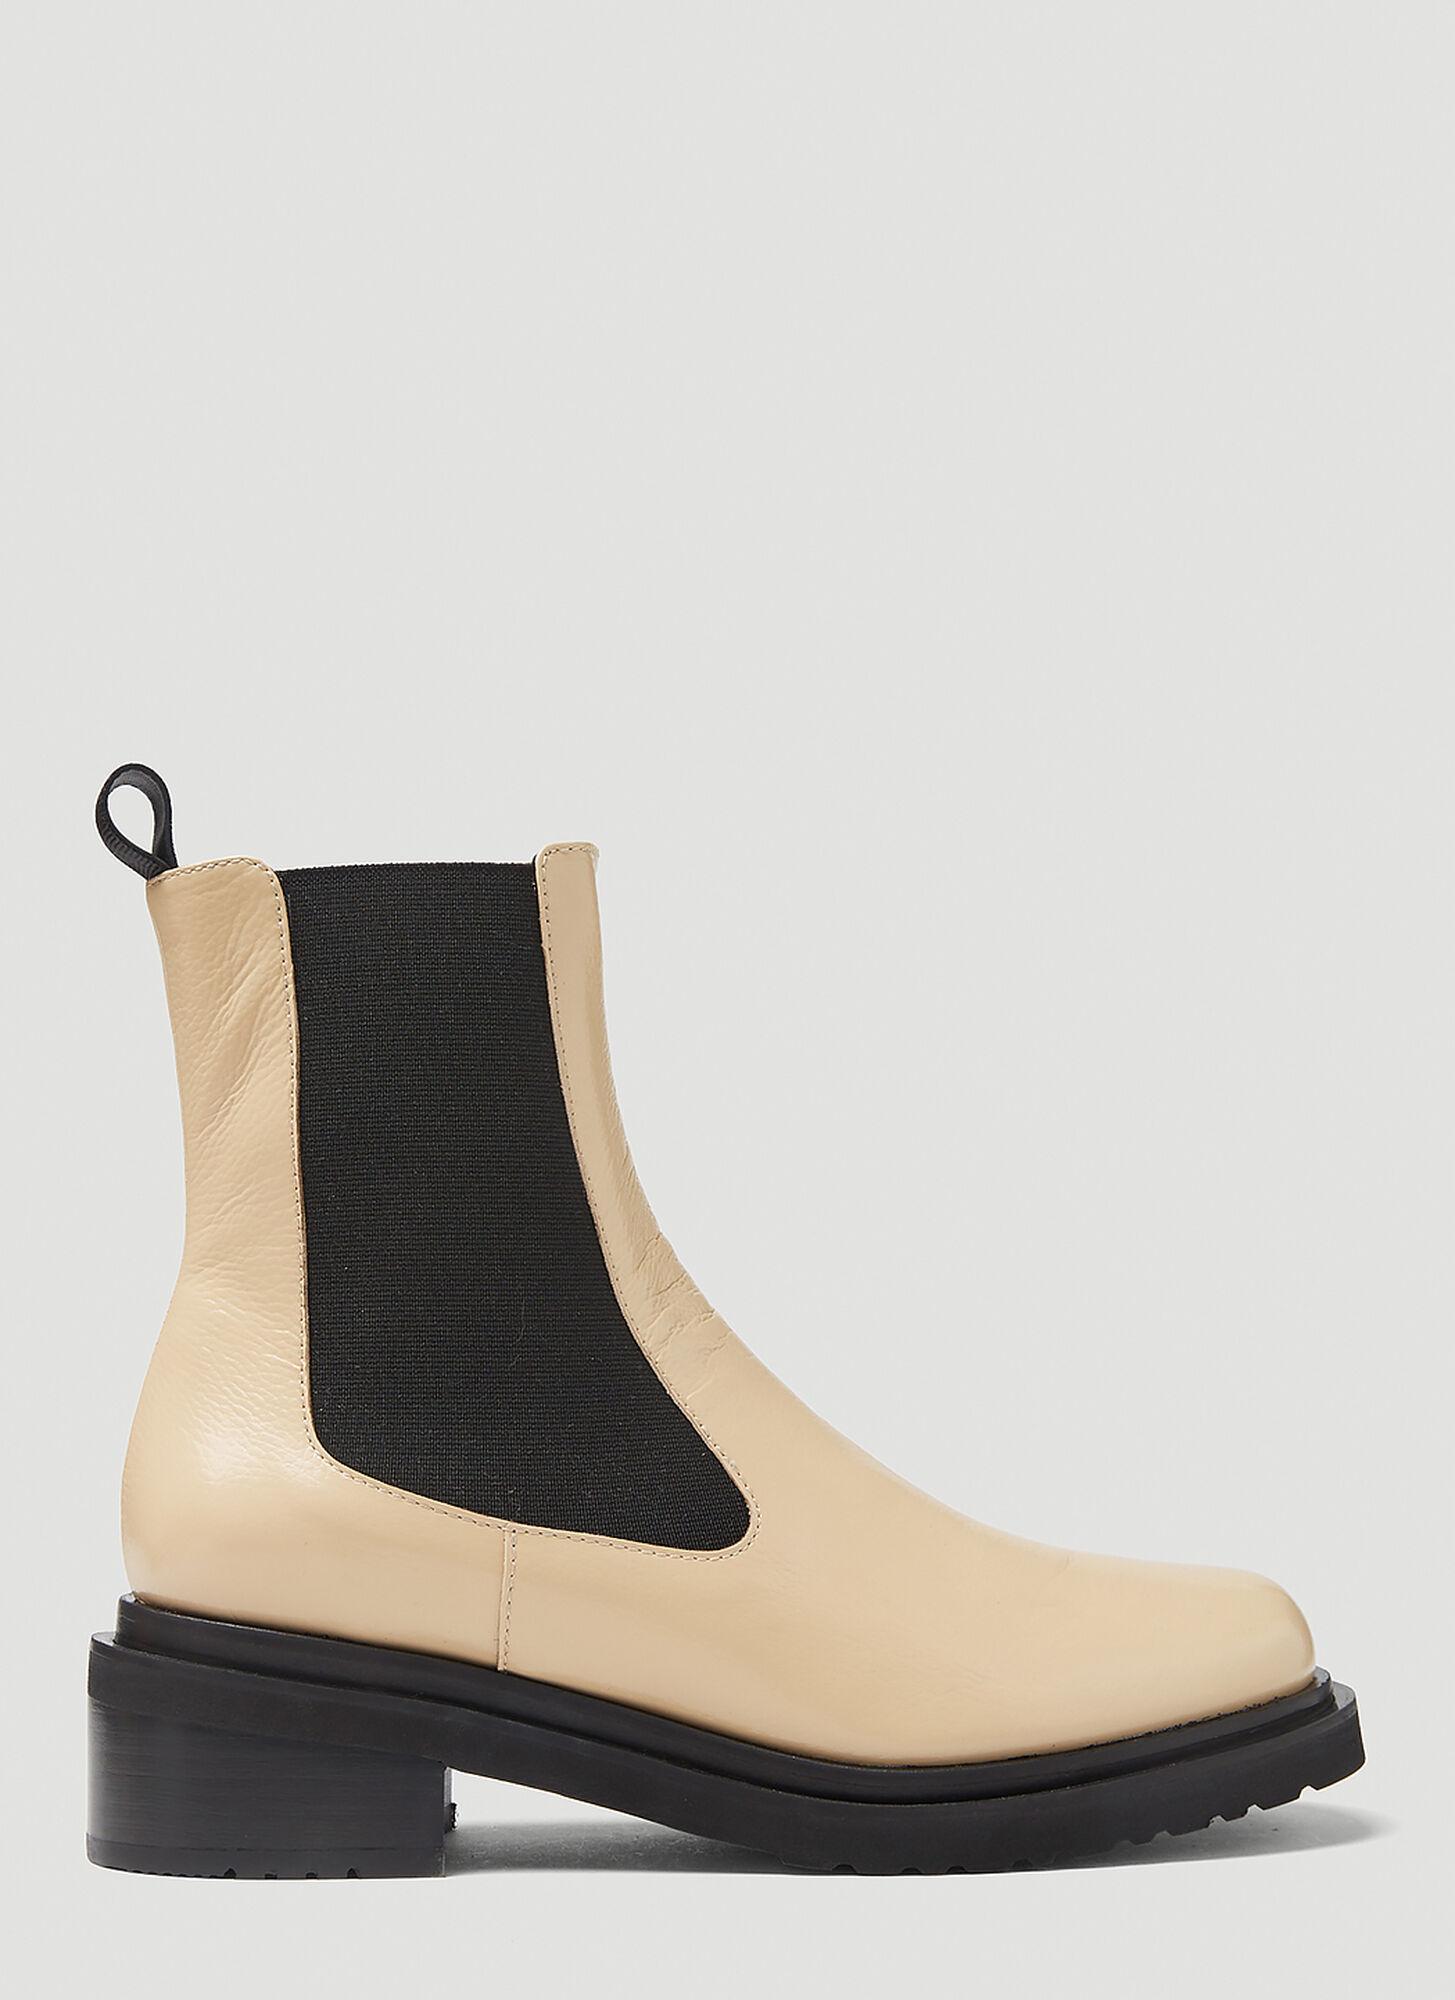 BY FAR Leather Rika Chelsea Boots in Beige (Natural) | Lyst